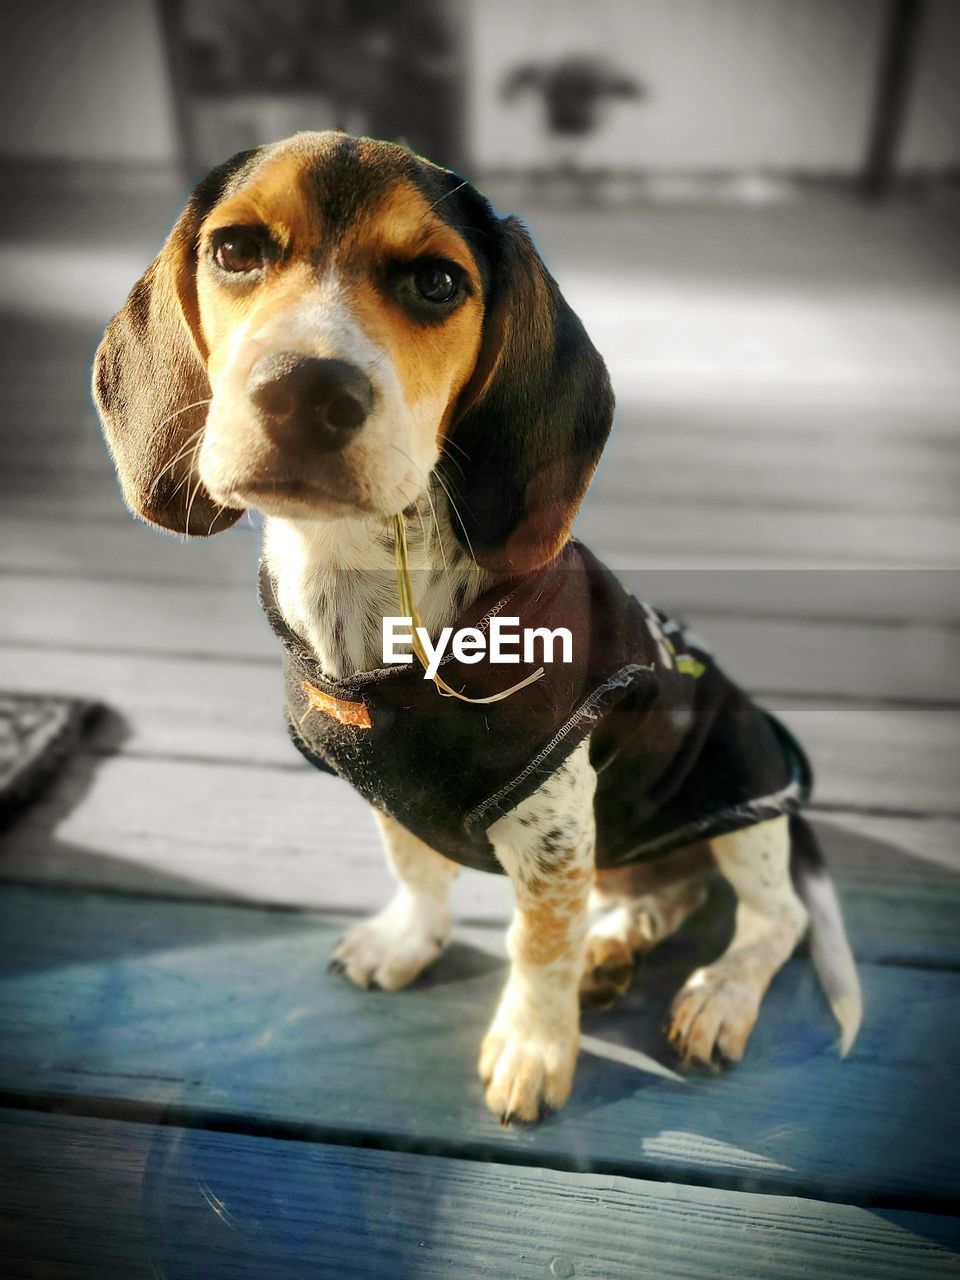 pet, one animal, dog, canine, domestic animals, animal, animal themes, mammal, beagle, basset artésien normand, puppy, basset hound, hound, no people, portrait, focus on foreground, collar, looking, treeing walker coonhound, pet collar, day, looking away, sitting